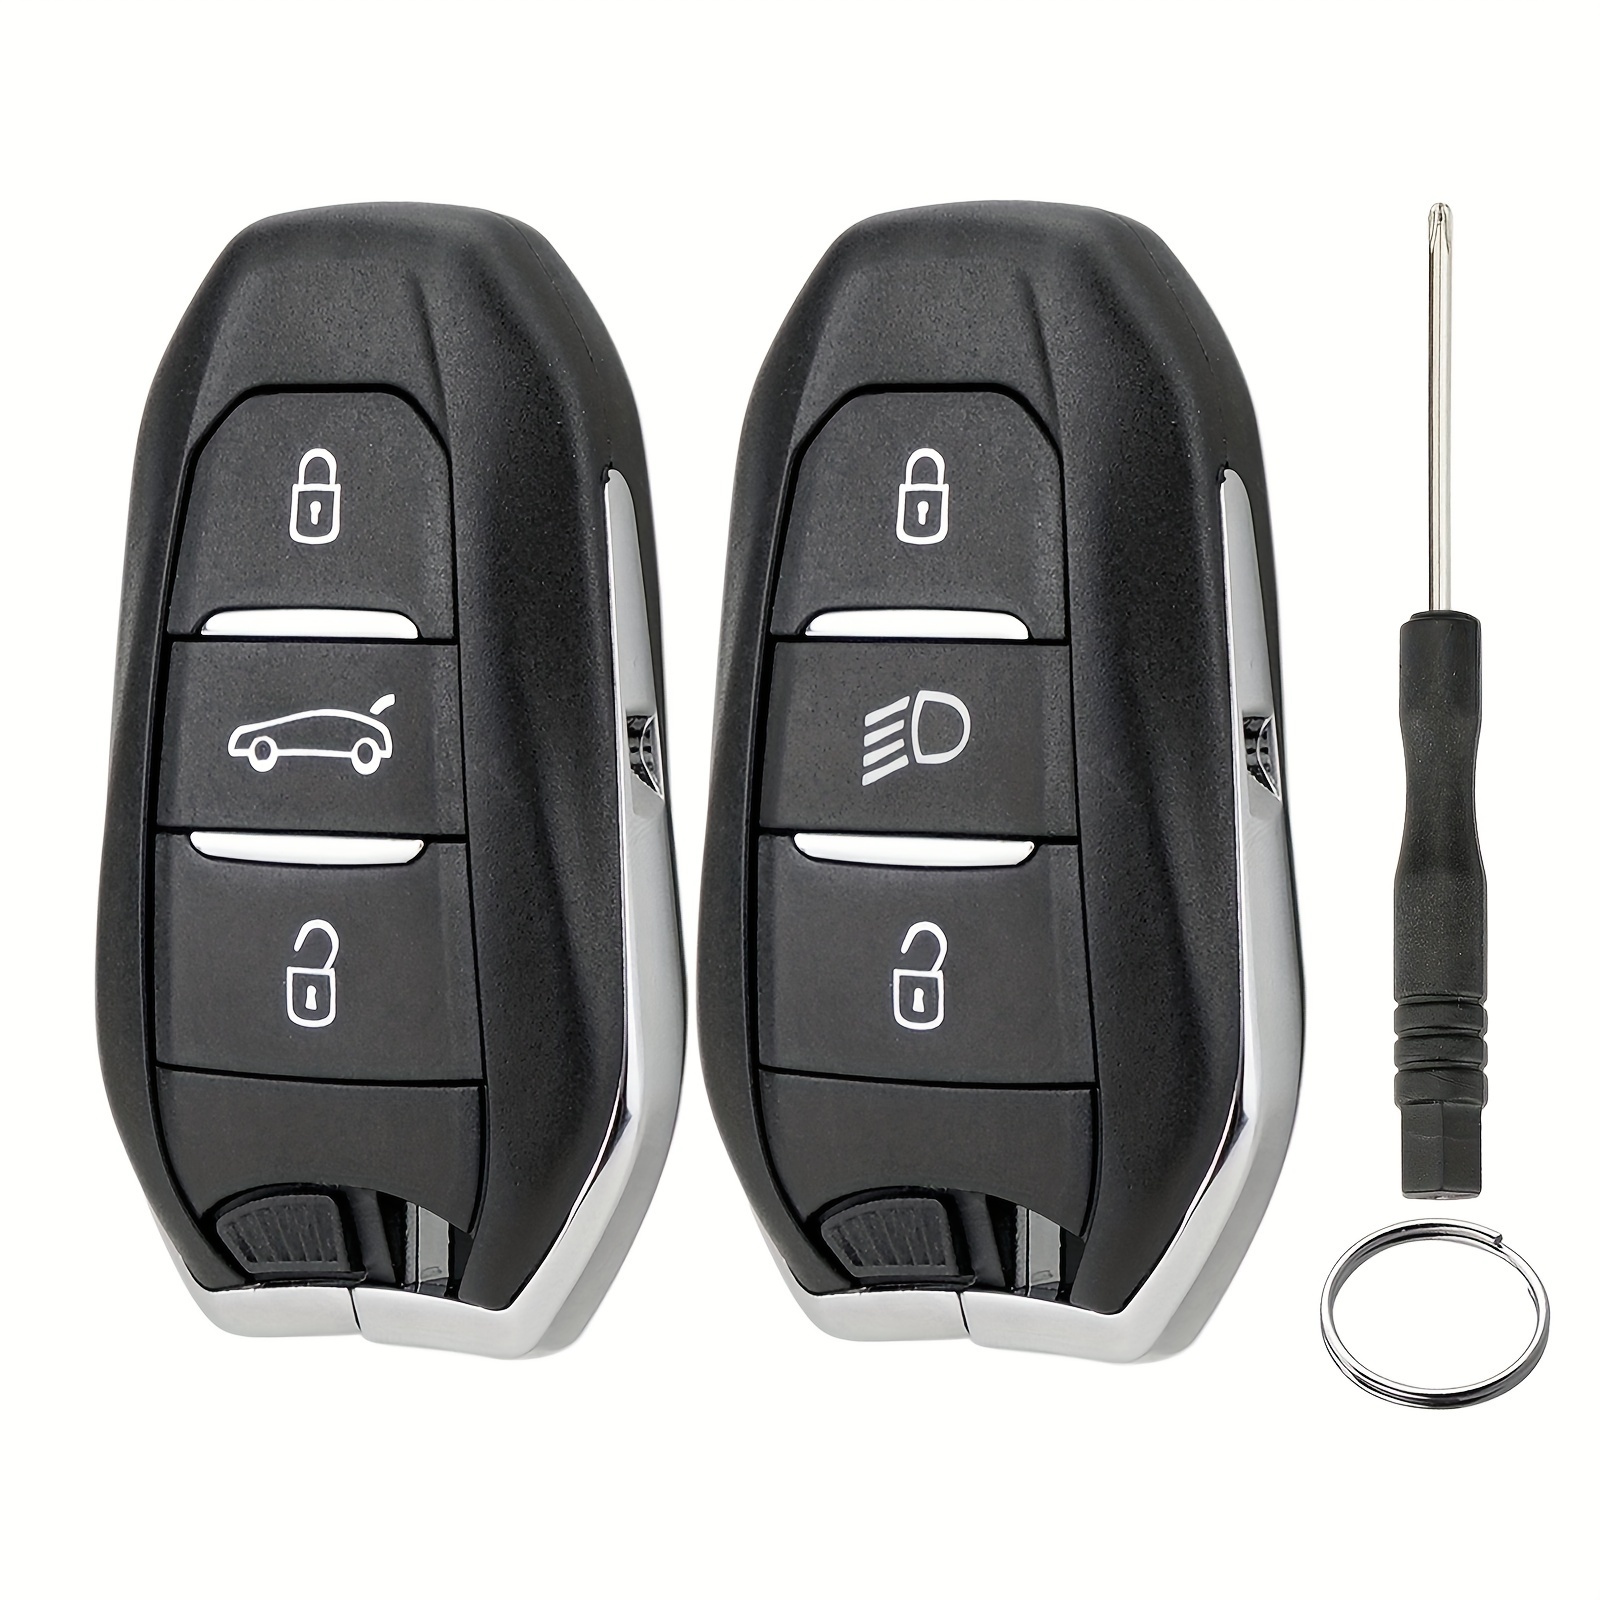 Dandkey CE0536 2/3 Buttons 433MHZ Car Remote Key For For Peugeot